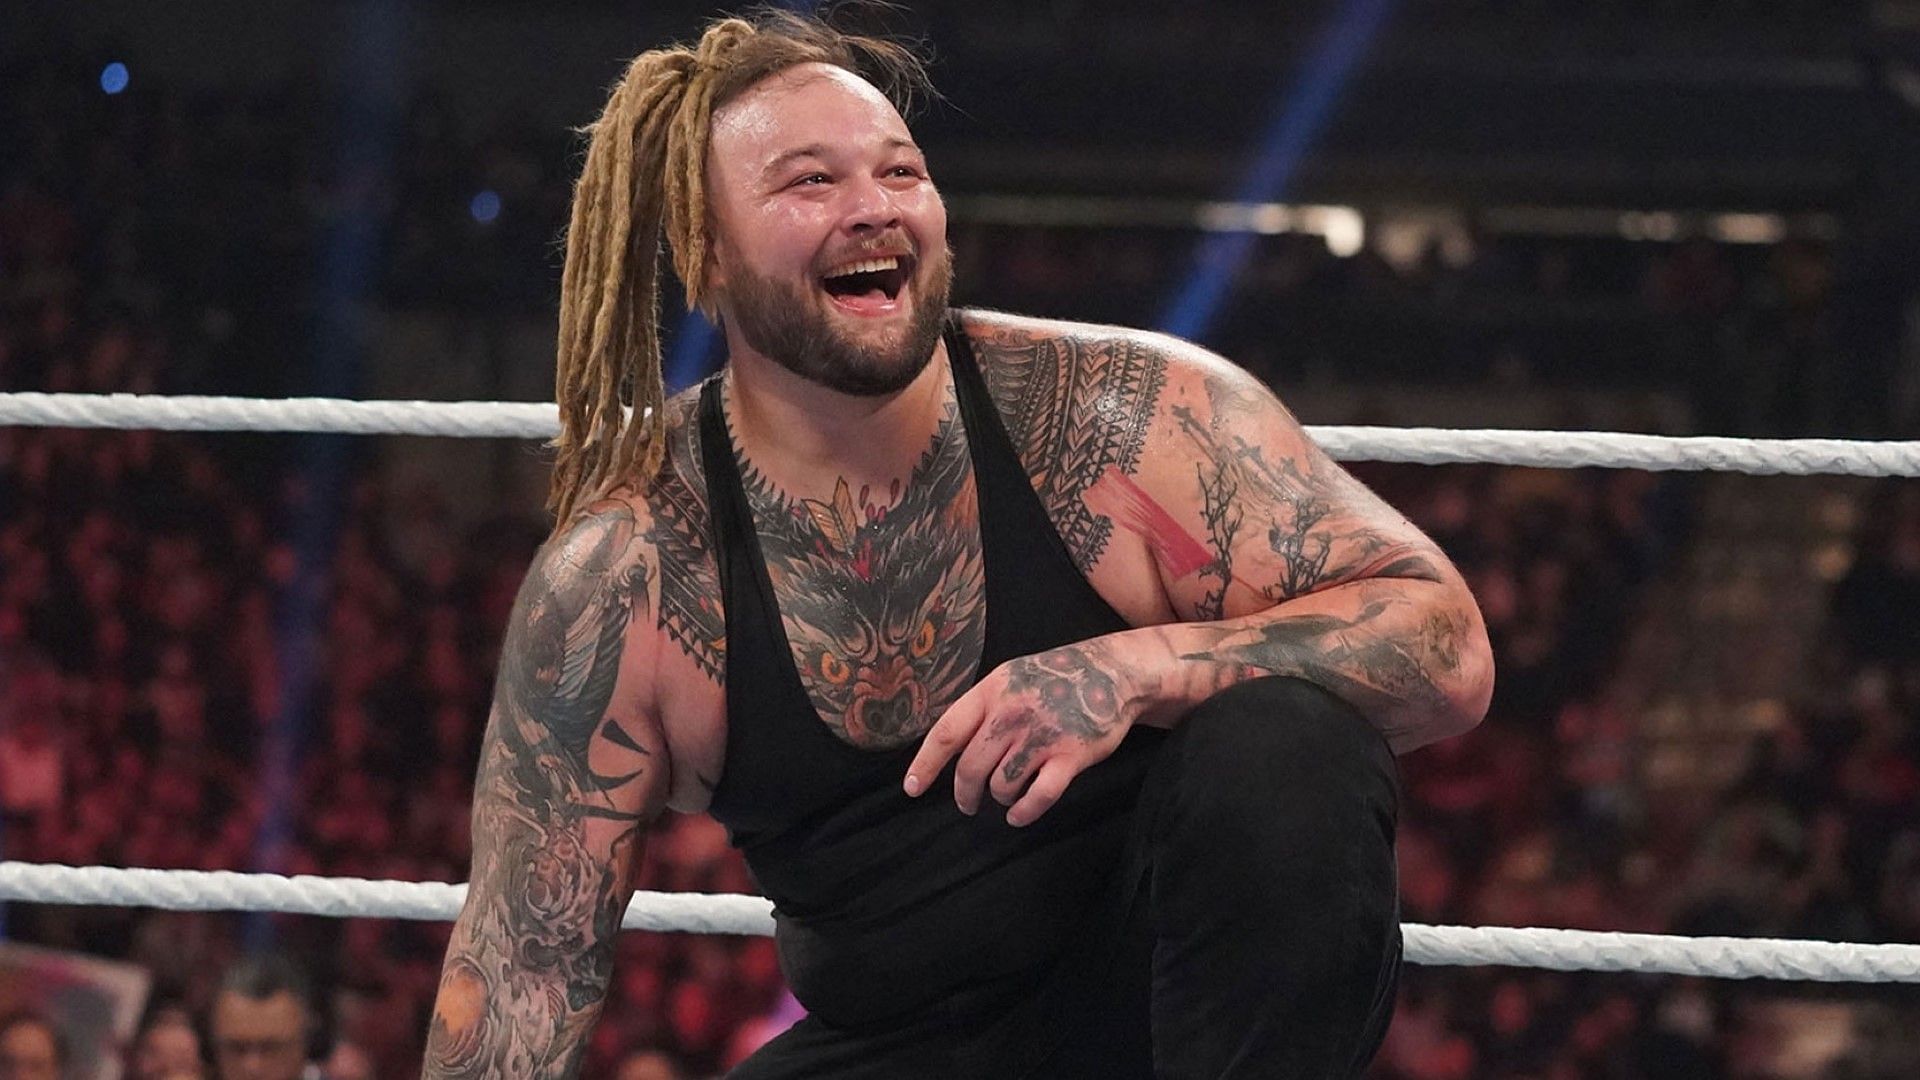 Bray Wyatt laughs in the ring on WWE SmackDown